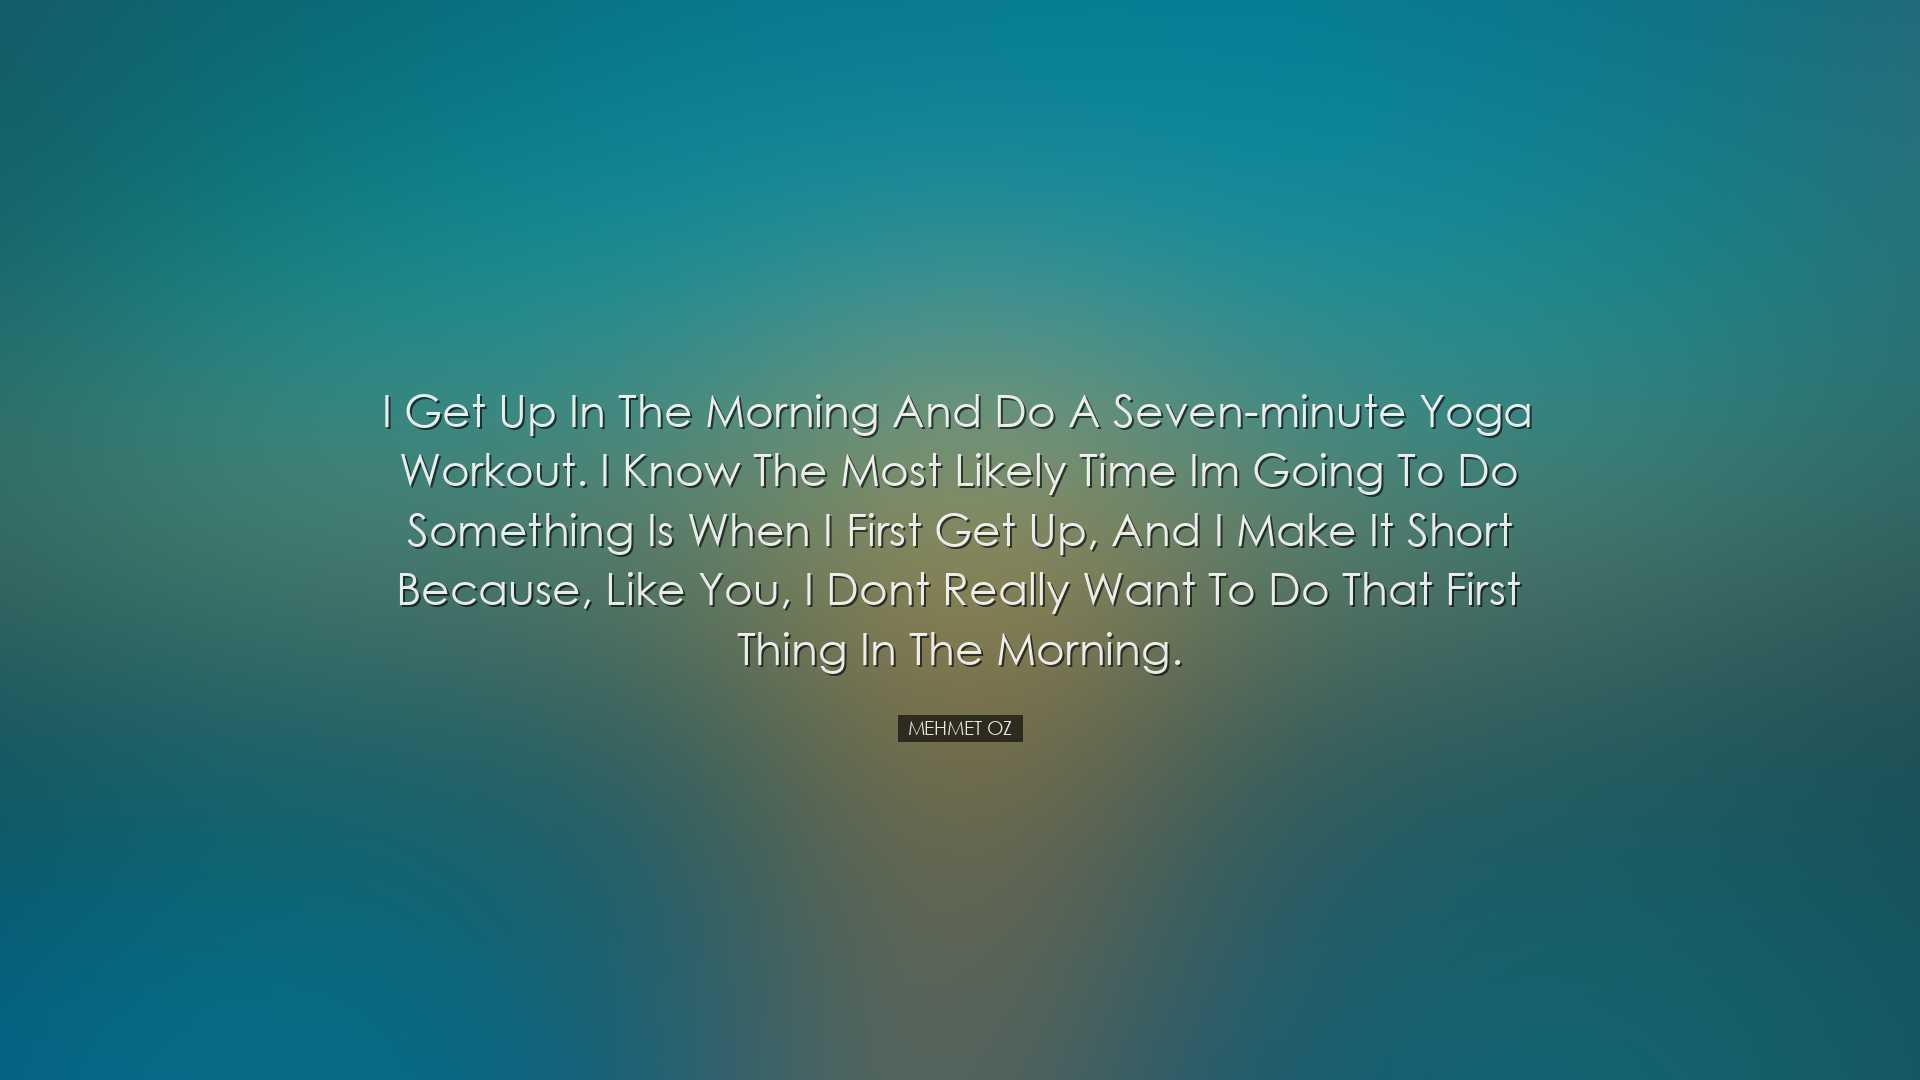 I get up in the morning and do a seven-minute yoga workout. I know